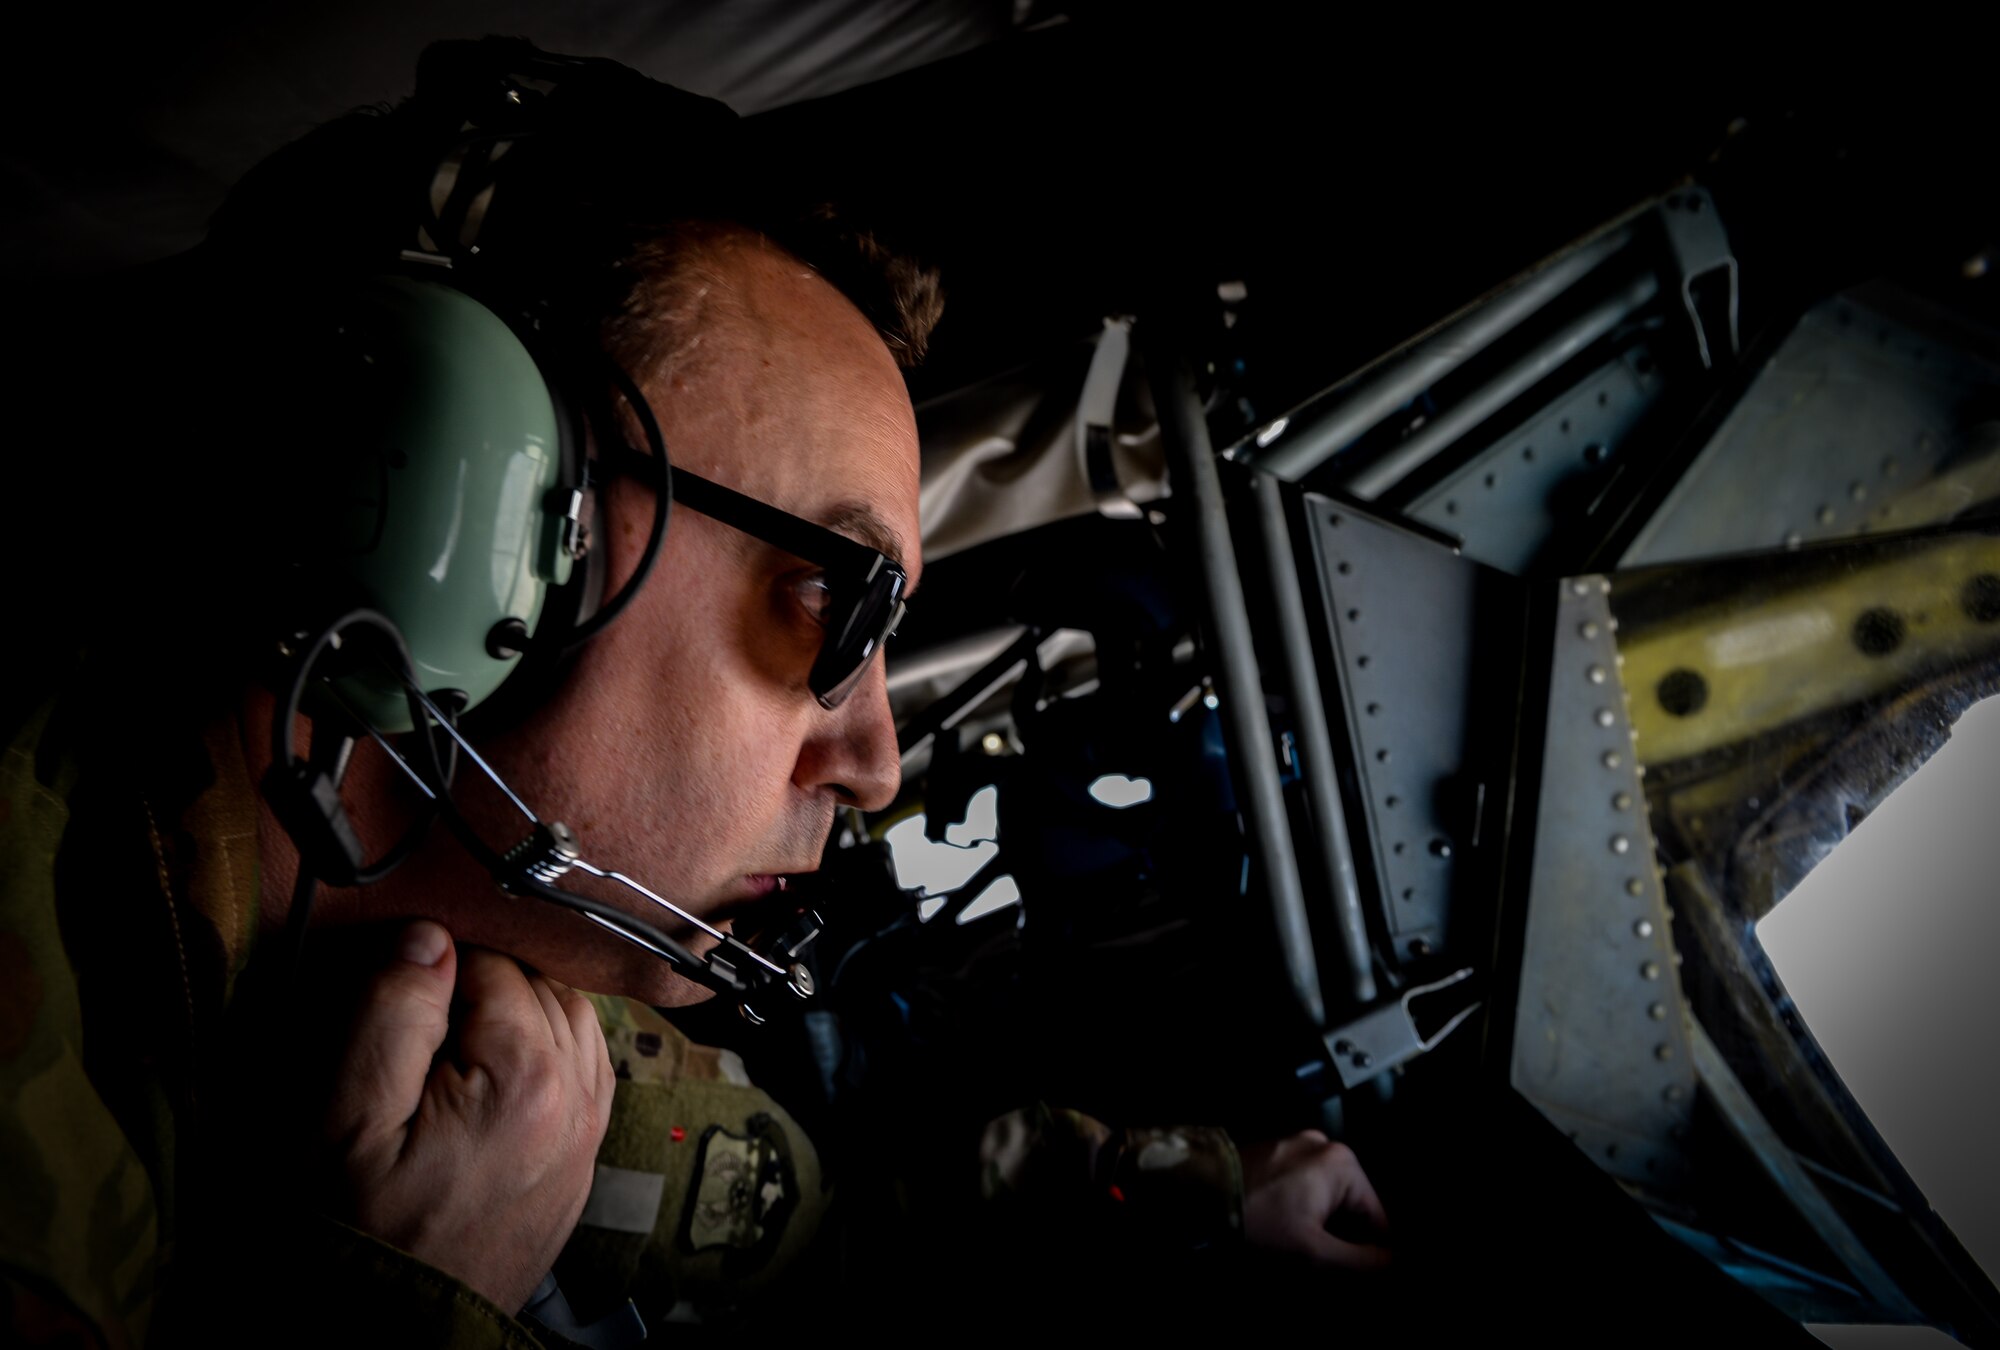 Master Sgt. Dillon Poole, 340th Expeditionary Air Refueling Squadron boom operator, awaits the arrival of a F-22 Raptor during an air refueling mission in support of Operation Inherent Resolve, June 20, 2017. The KC-135 provides aerial refueling capabilities as it supports U.S. and coalition forces working to liberate territory and people under the control of ISIS. (U.S. Air Force photo by Staff Sgt. Michael Battles)